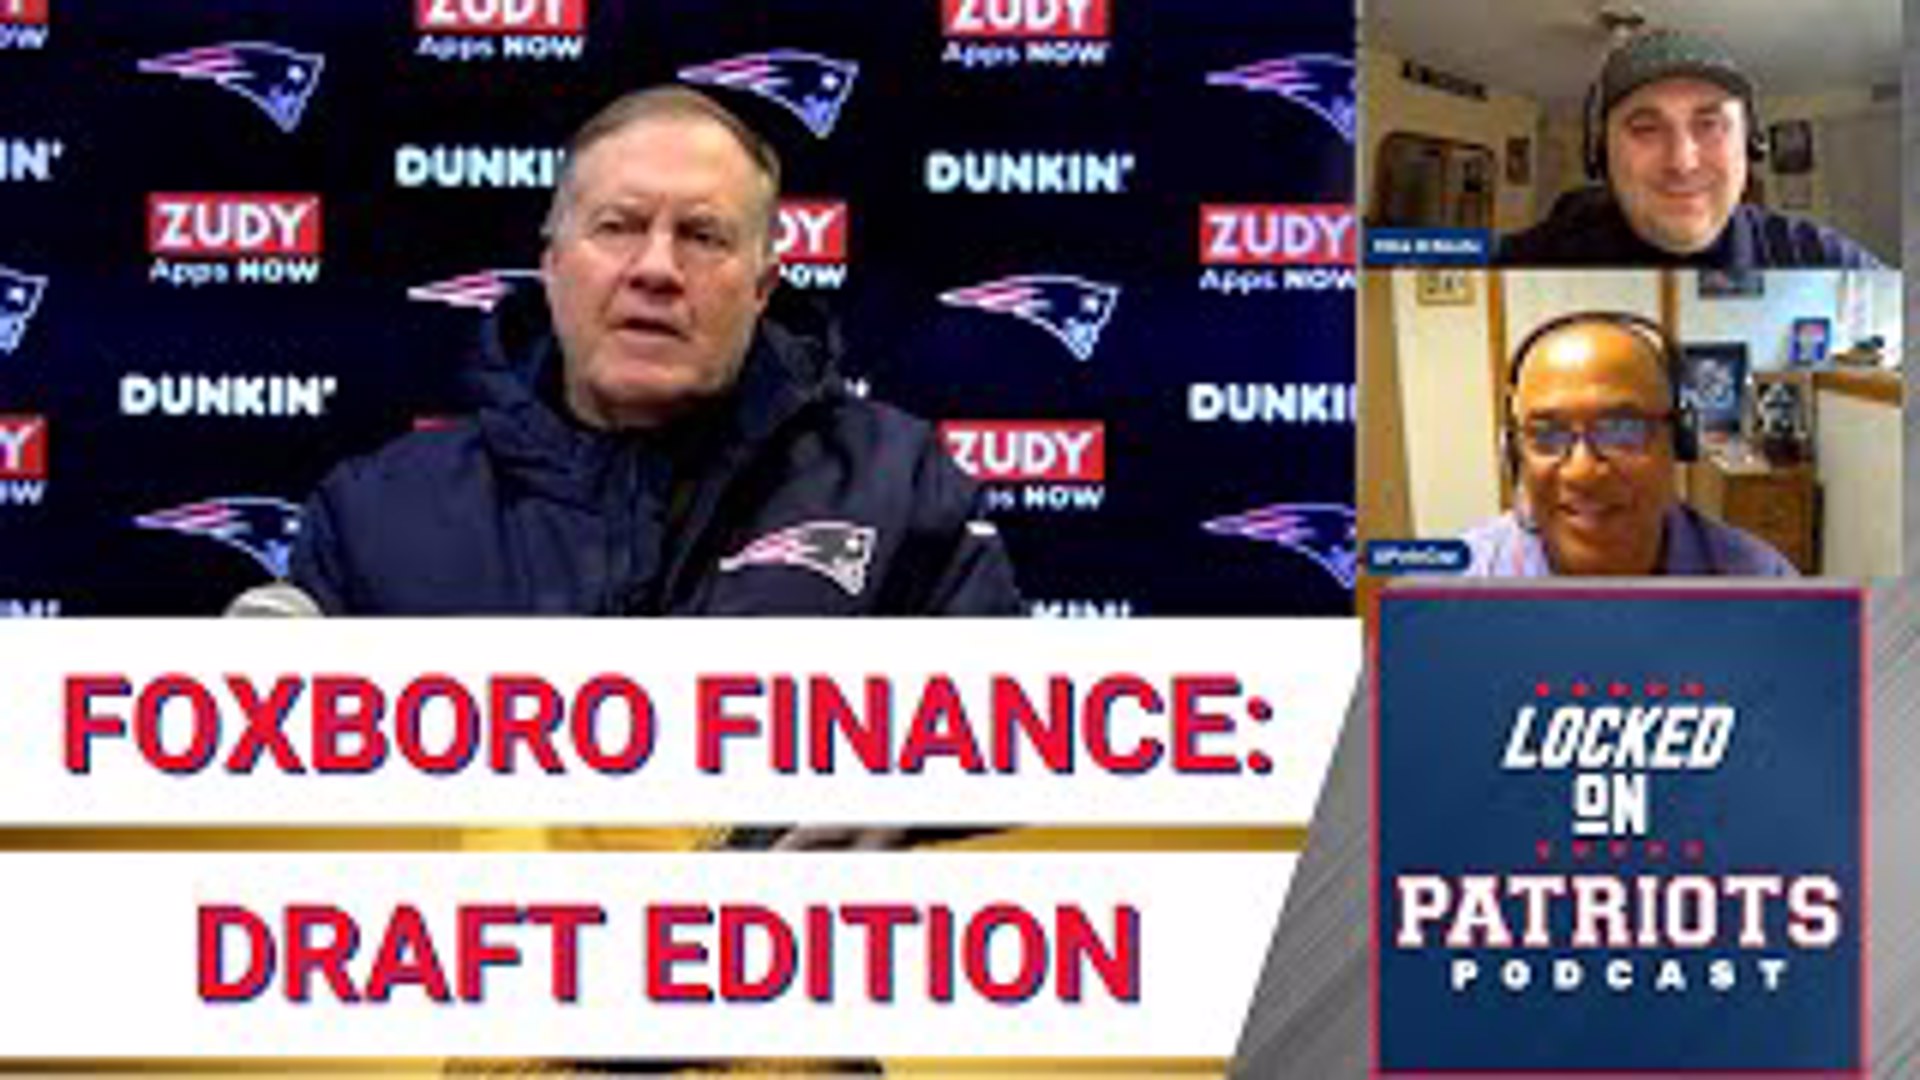 With the image of the 2022 NFL Draft starting to shrink in the rearview mirror, the New England Patriots are getting down to business. More on Locked On Patriots.